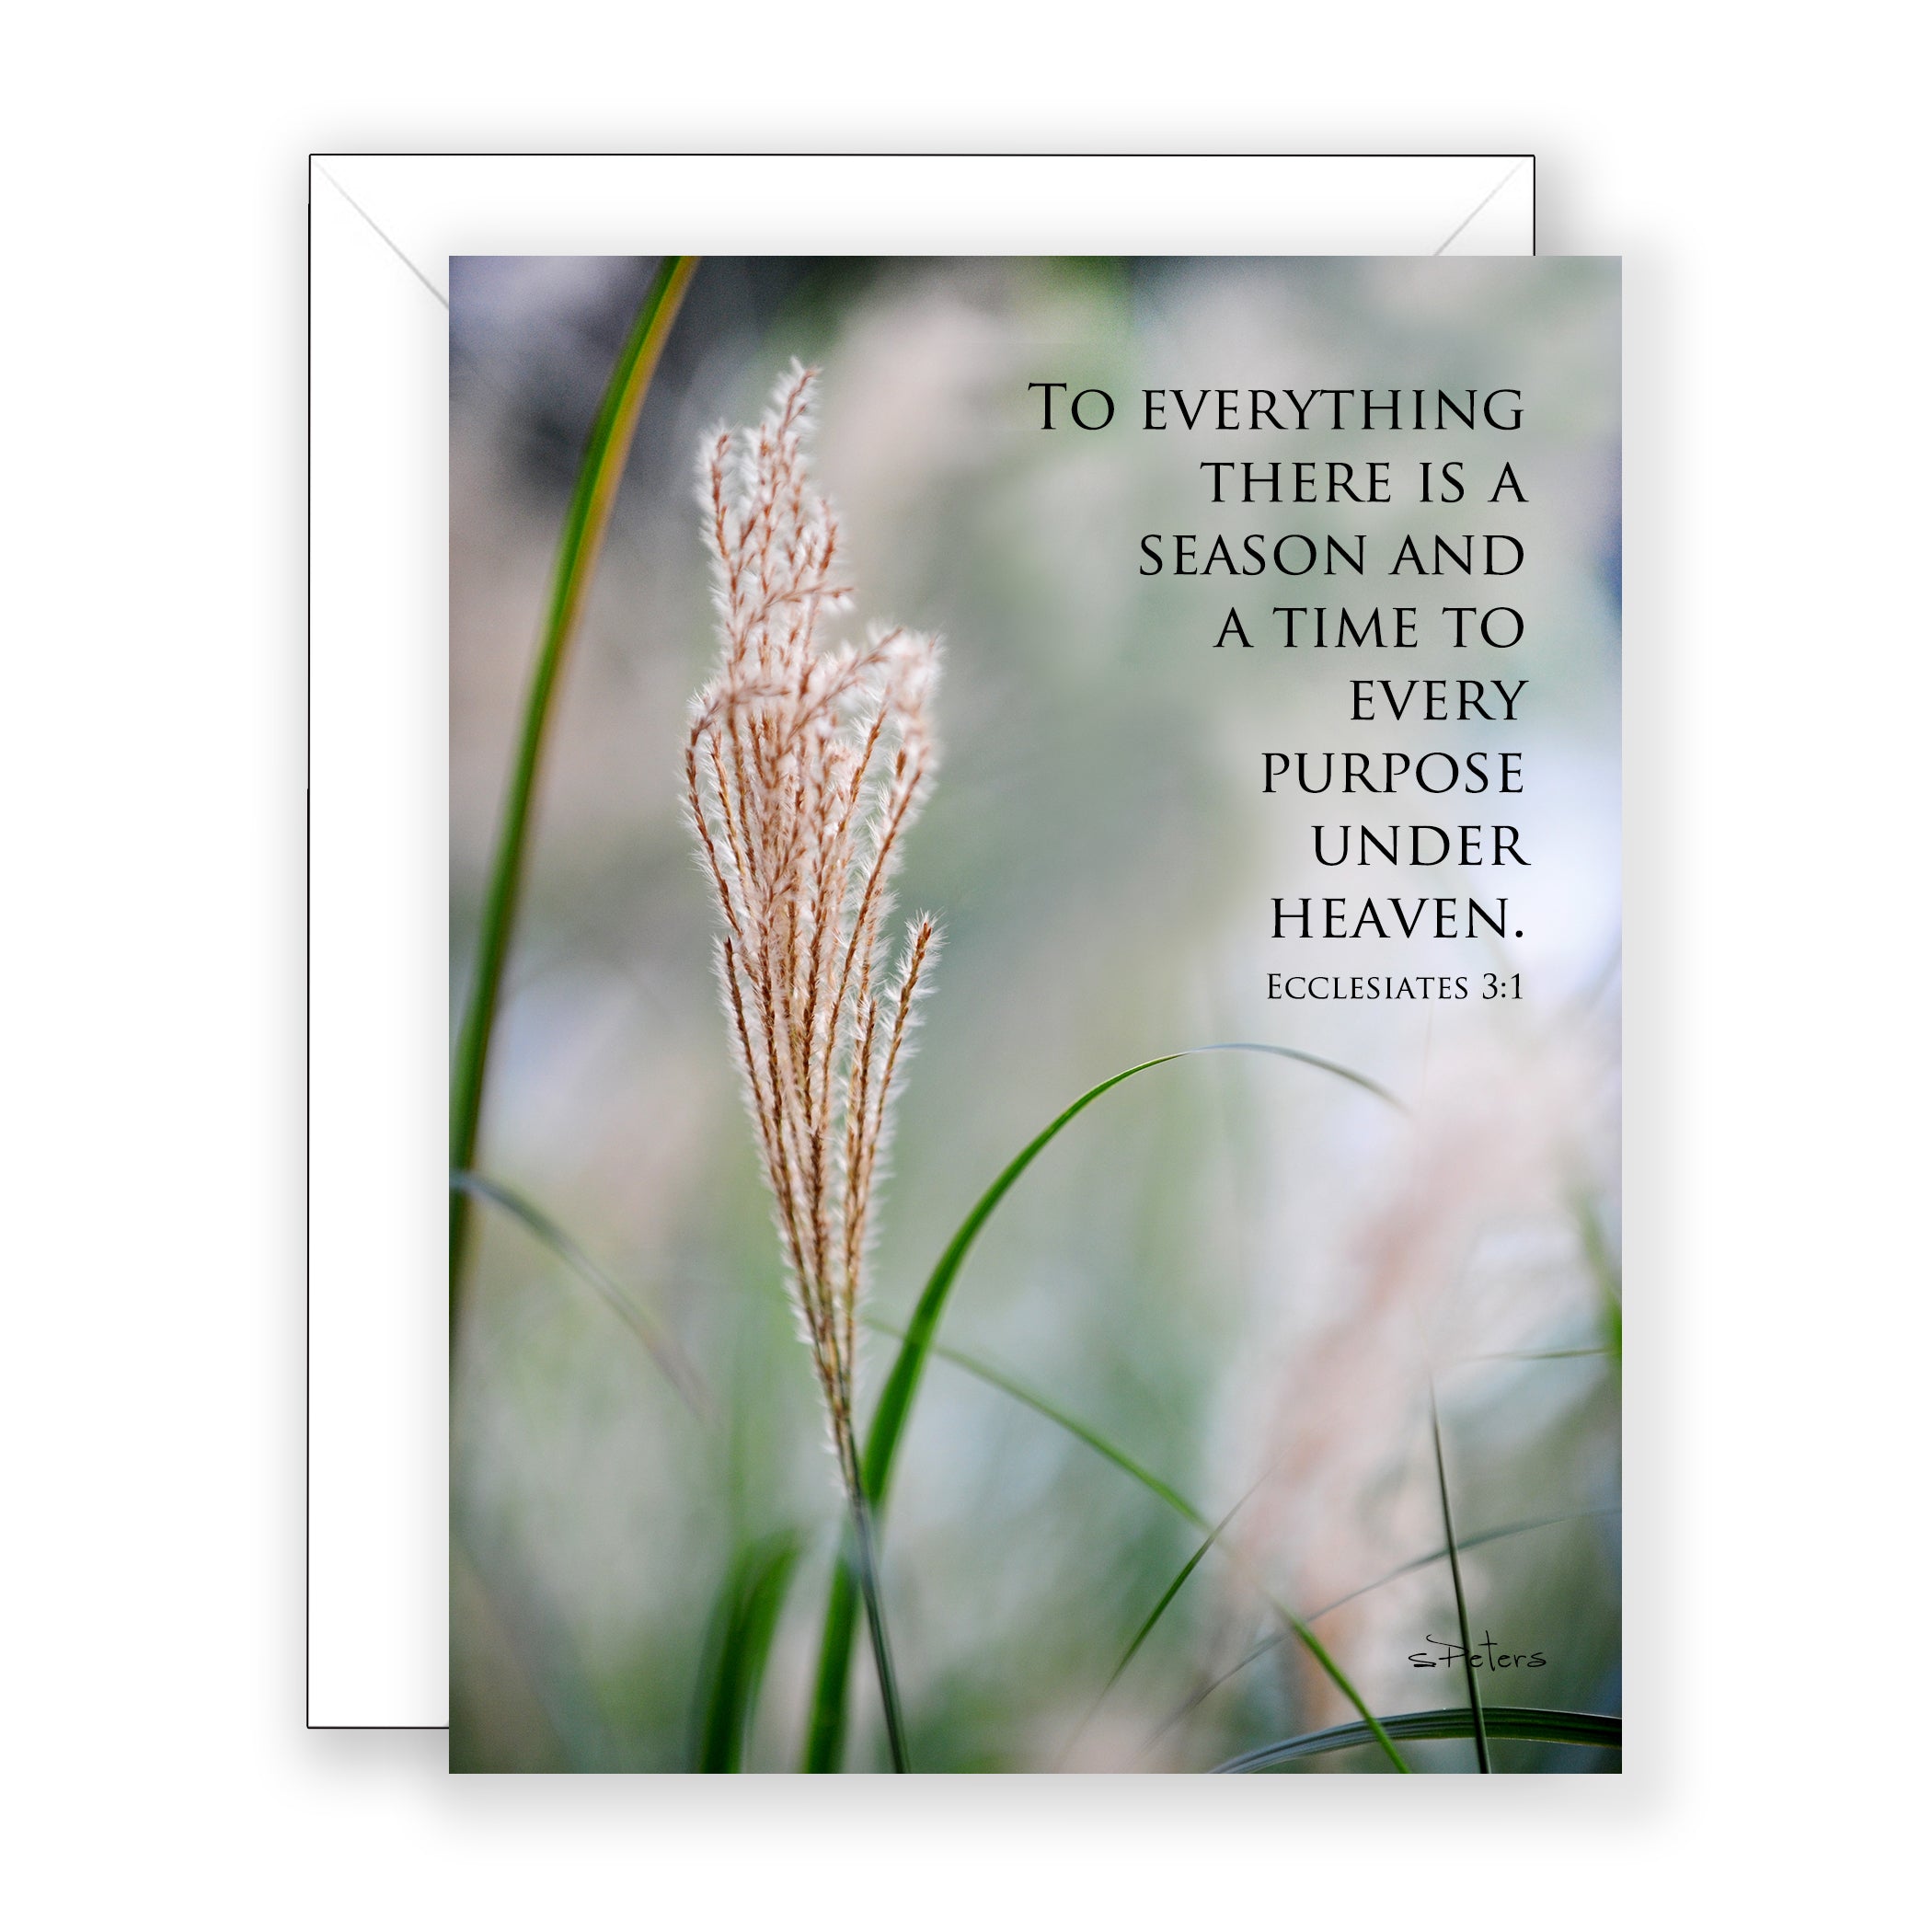 Earthly Blessing (Ecclesiastes 3:1) - Encouragement Card (Blank)